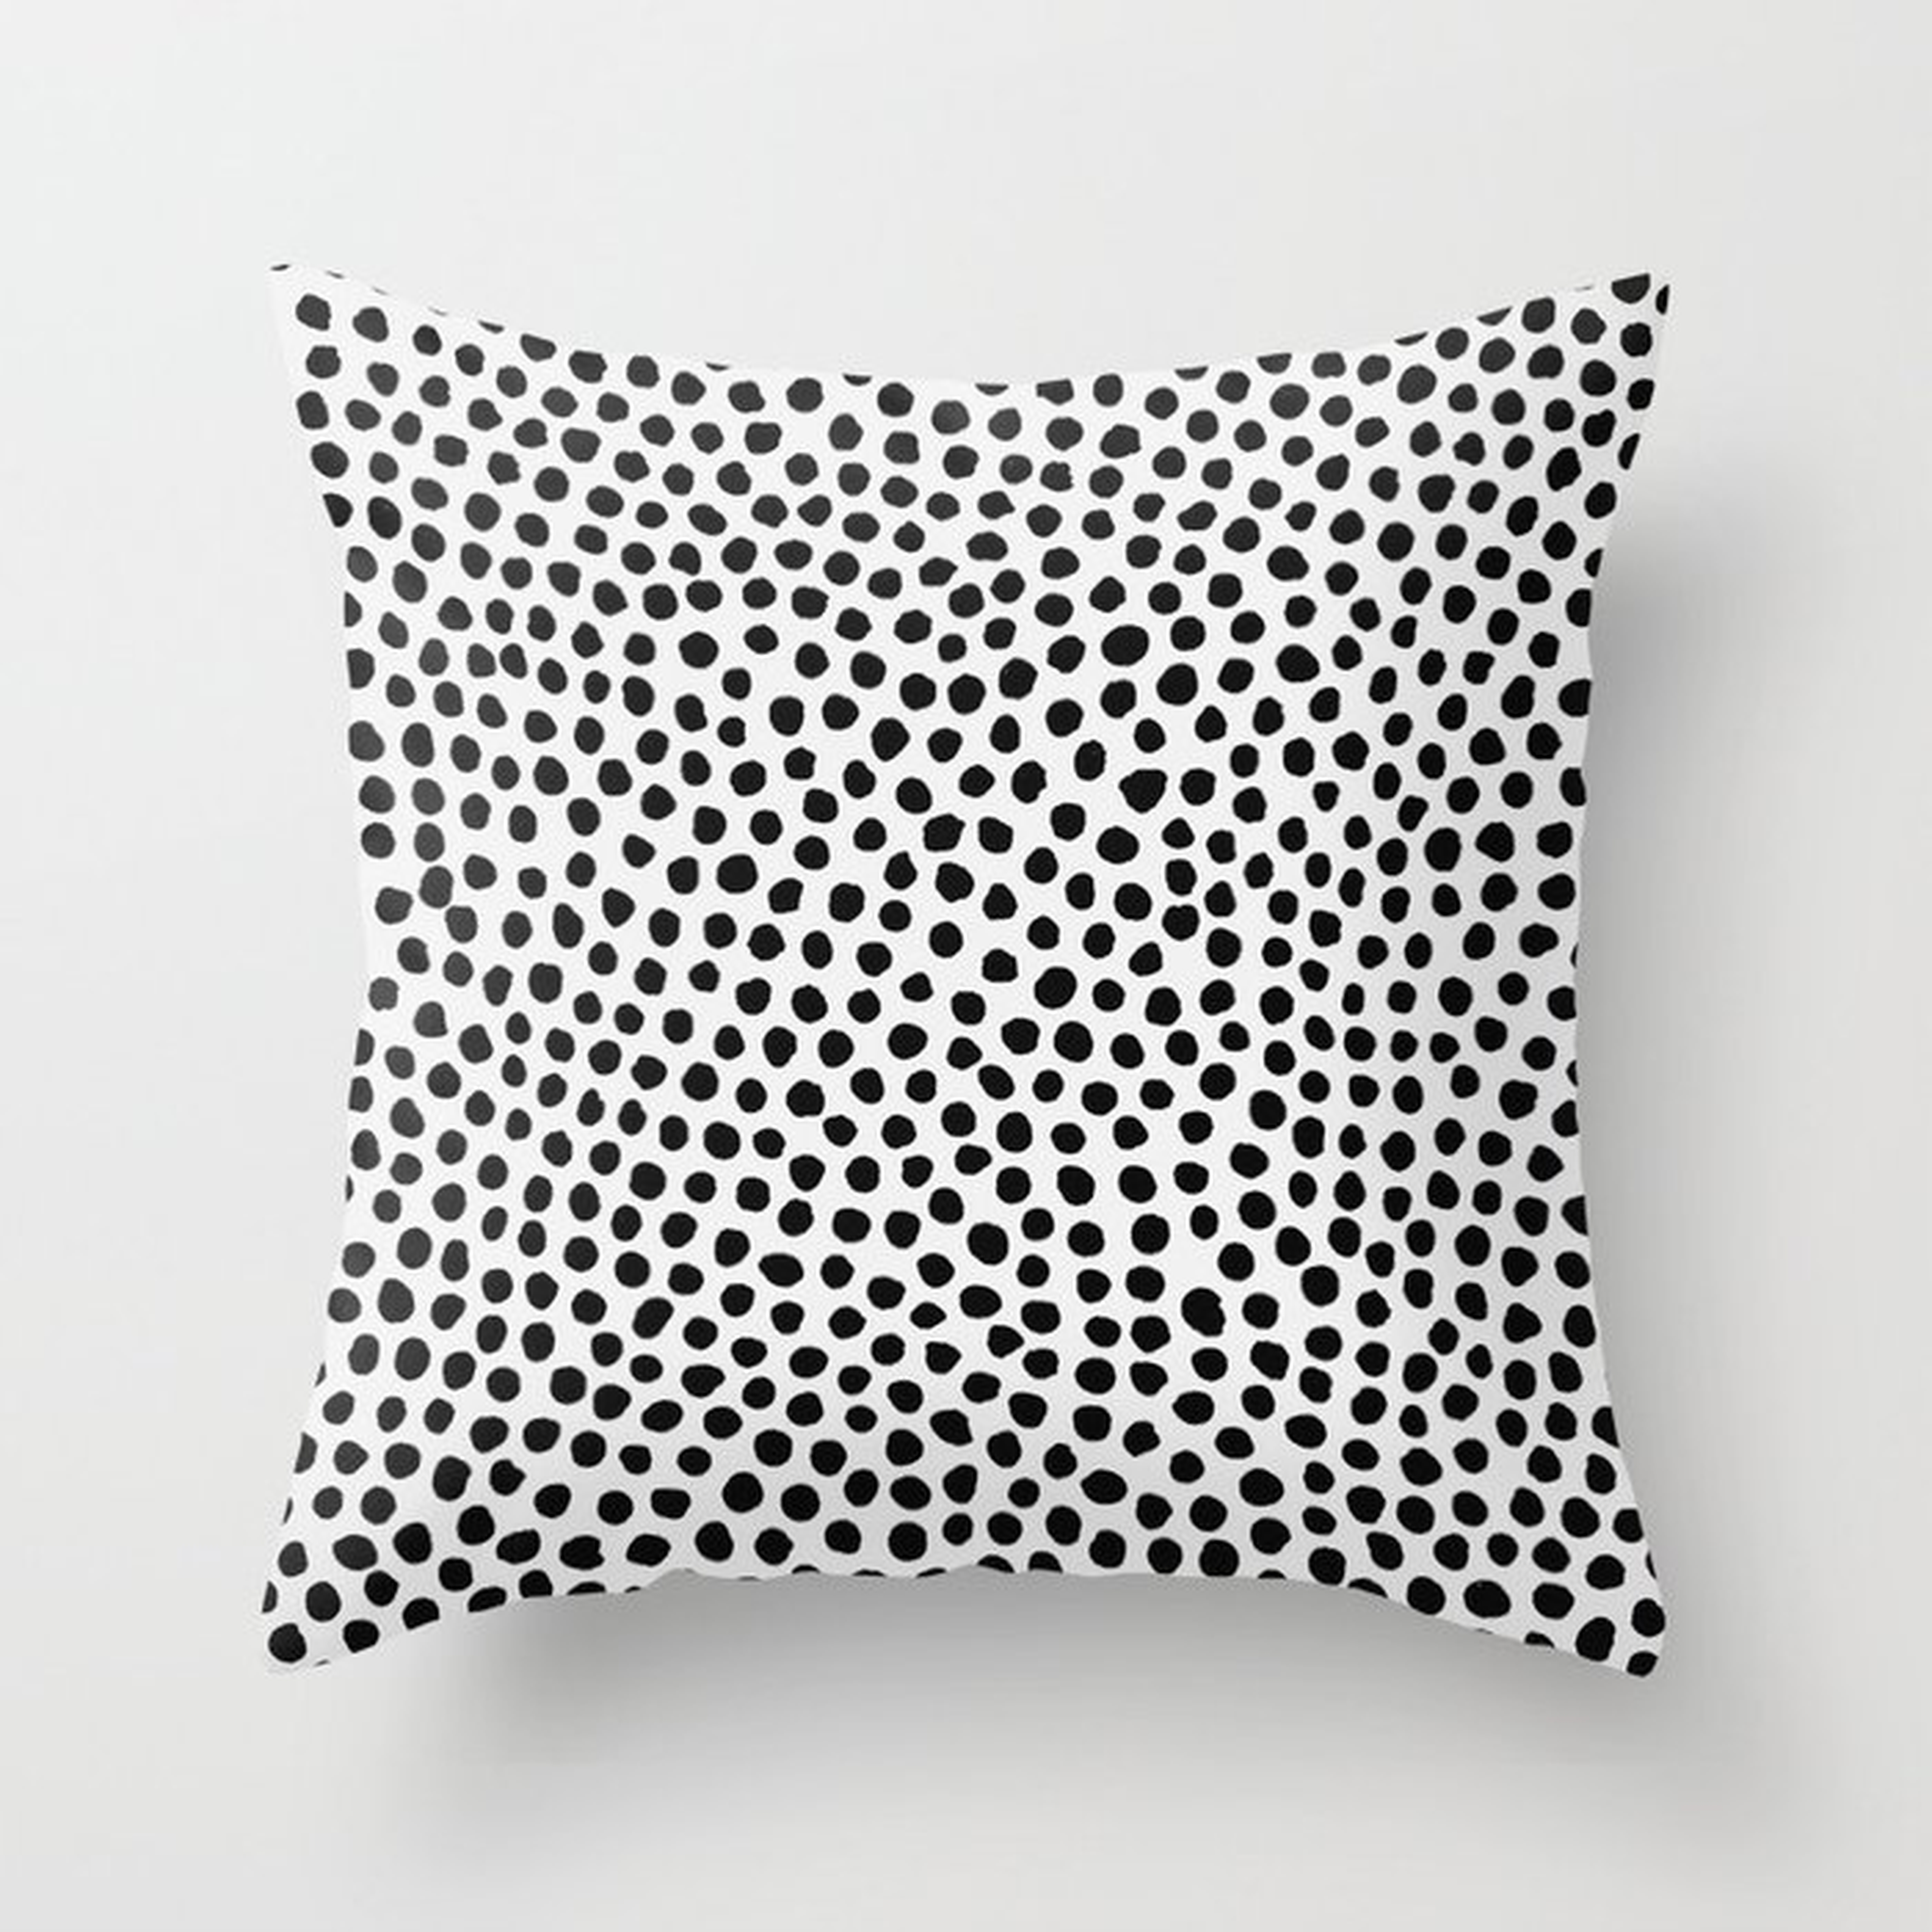 Dots Pattern Couch Throw Pillow by Georgiana Paraschiv - Cover (24" x 24") with pillow insert - Indoor Pillow - Society6